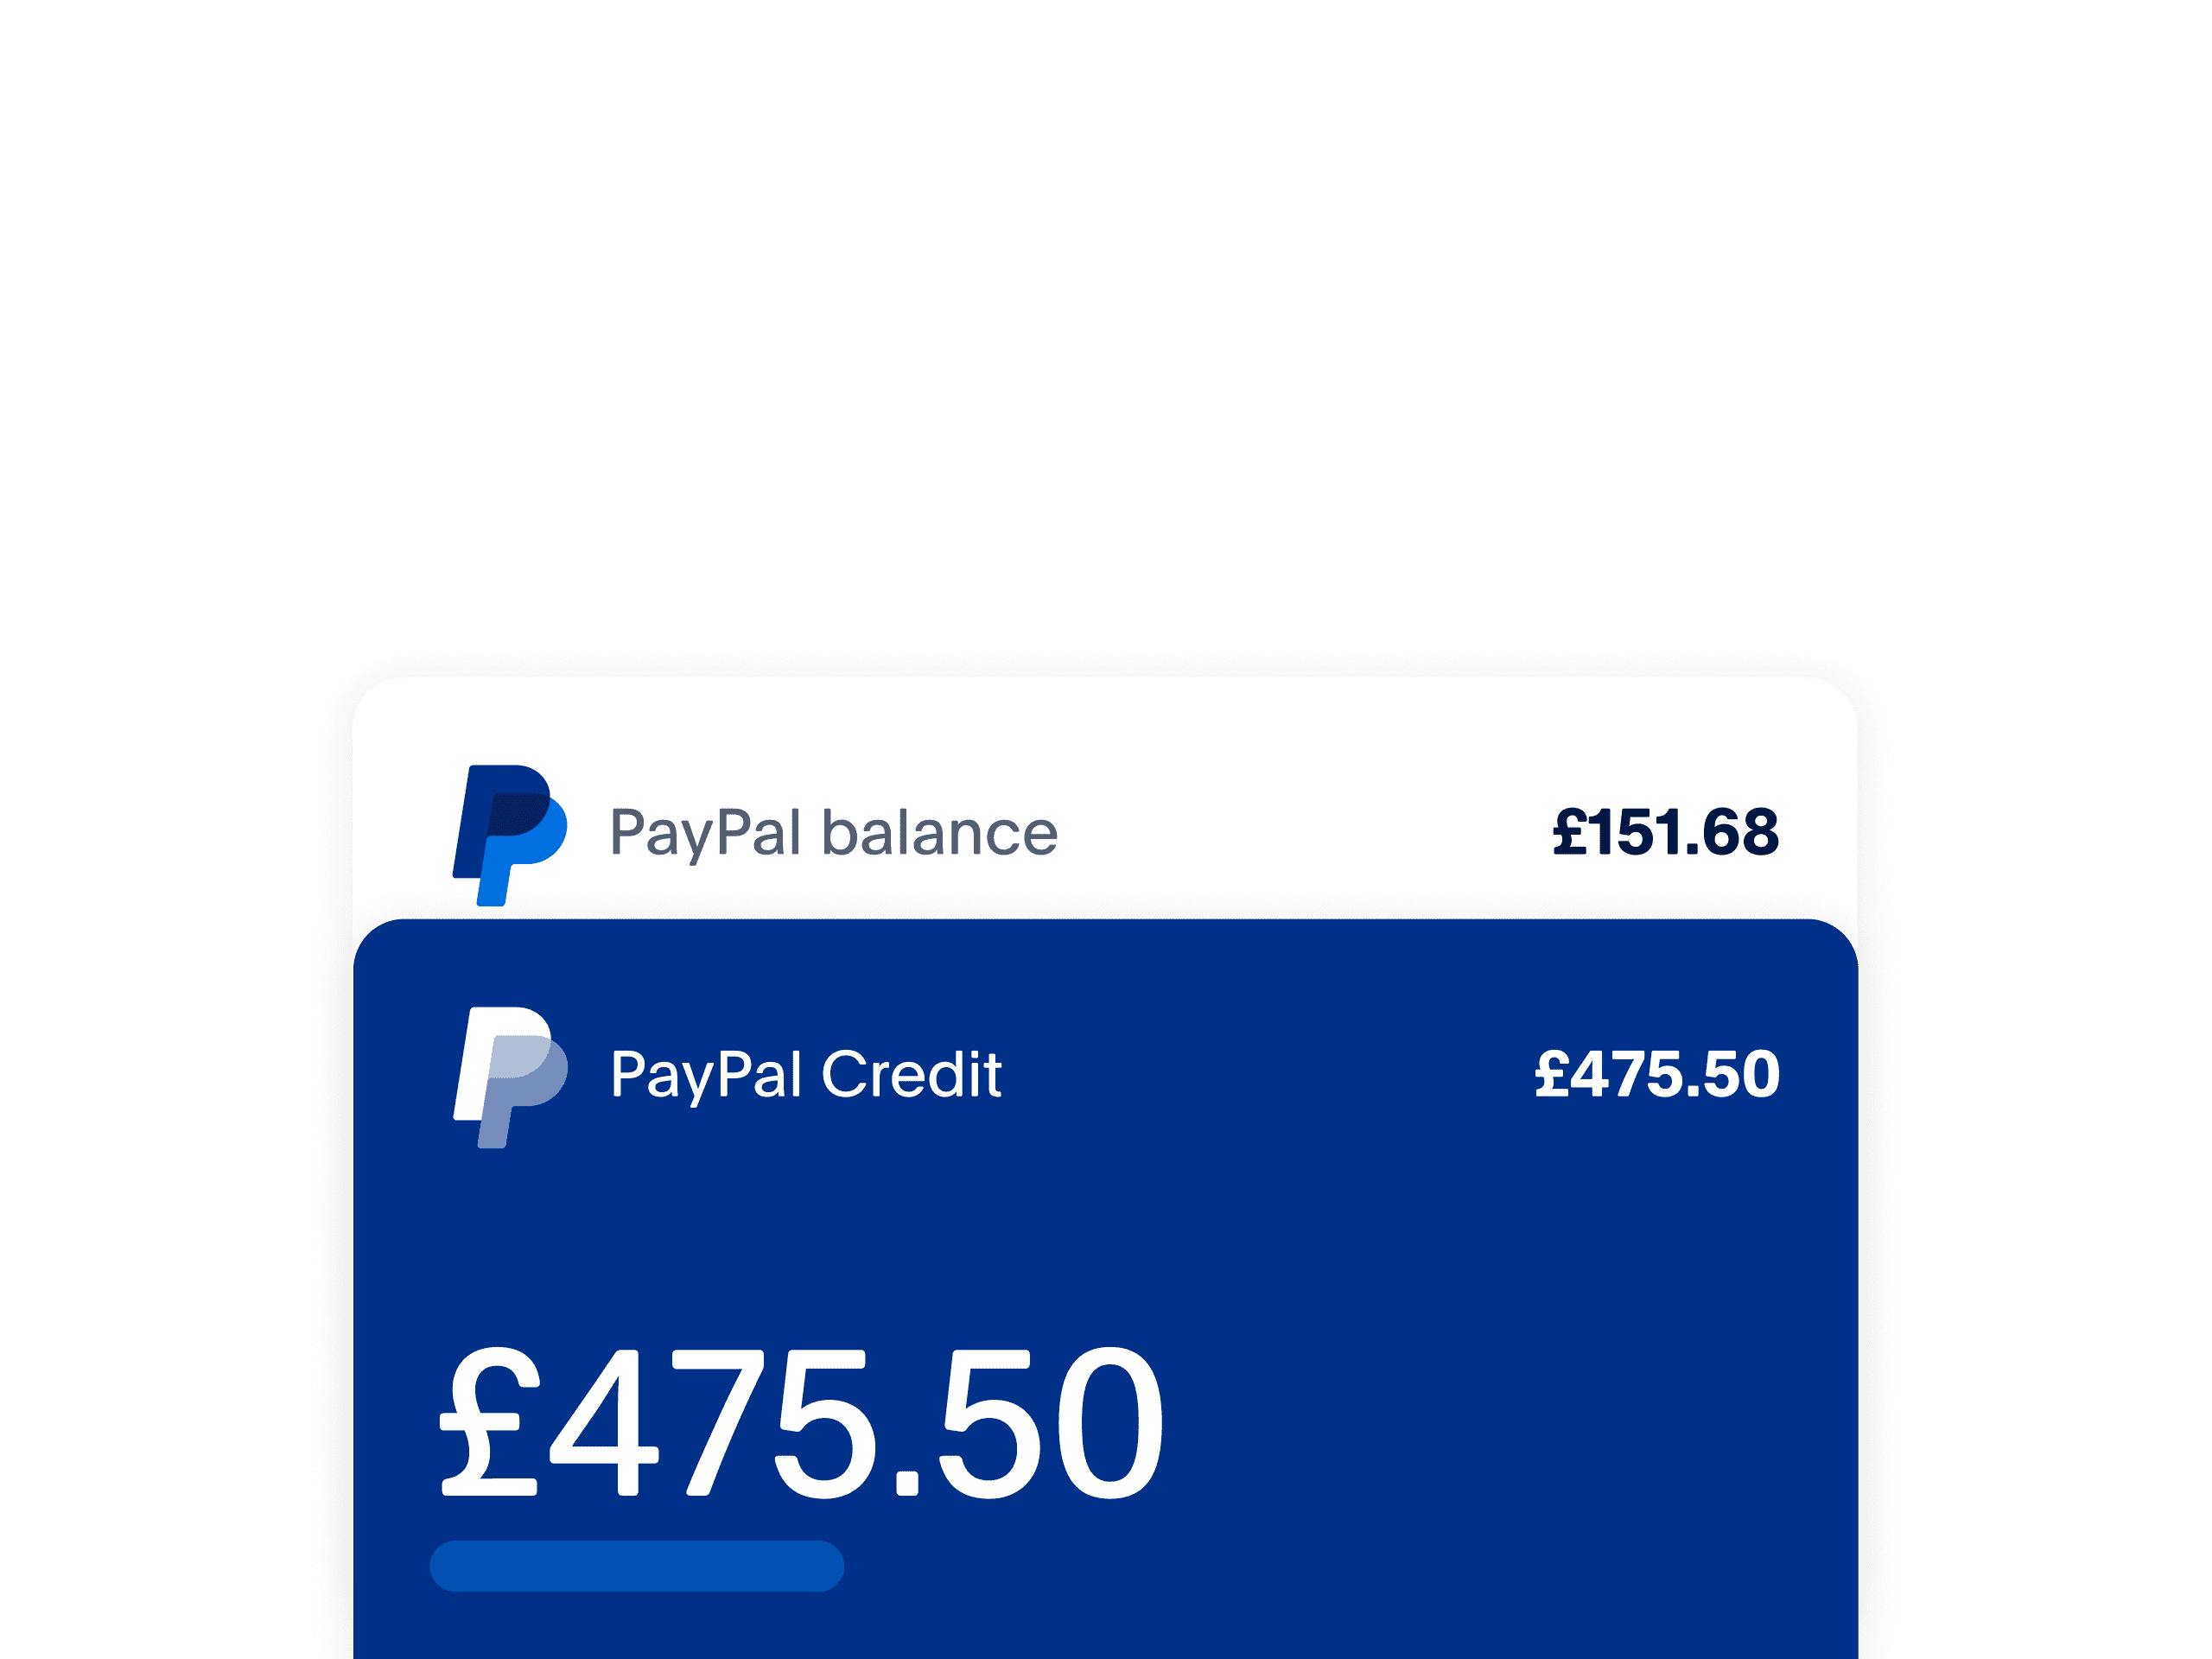 Line of Credit and Card Products | PayPal UK